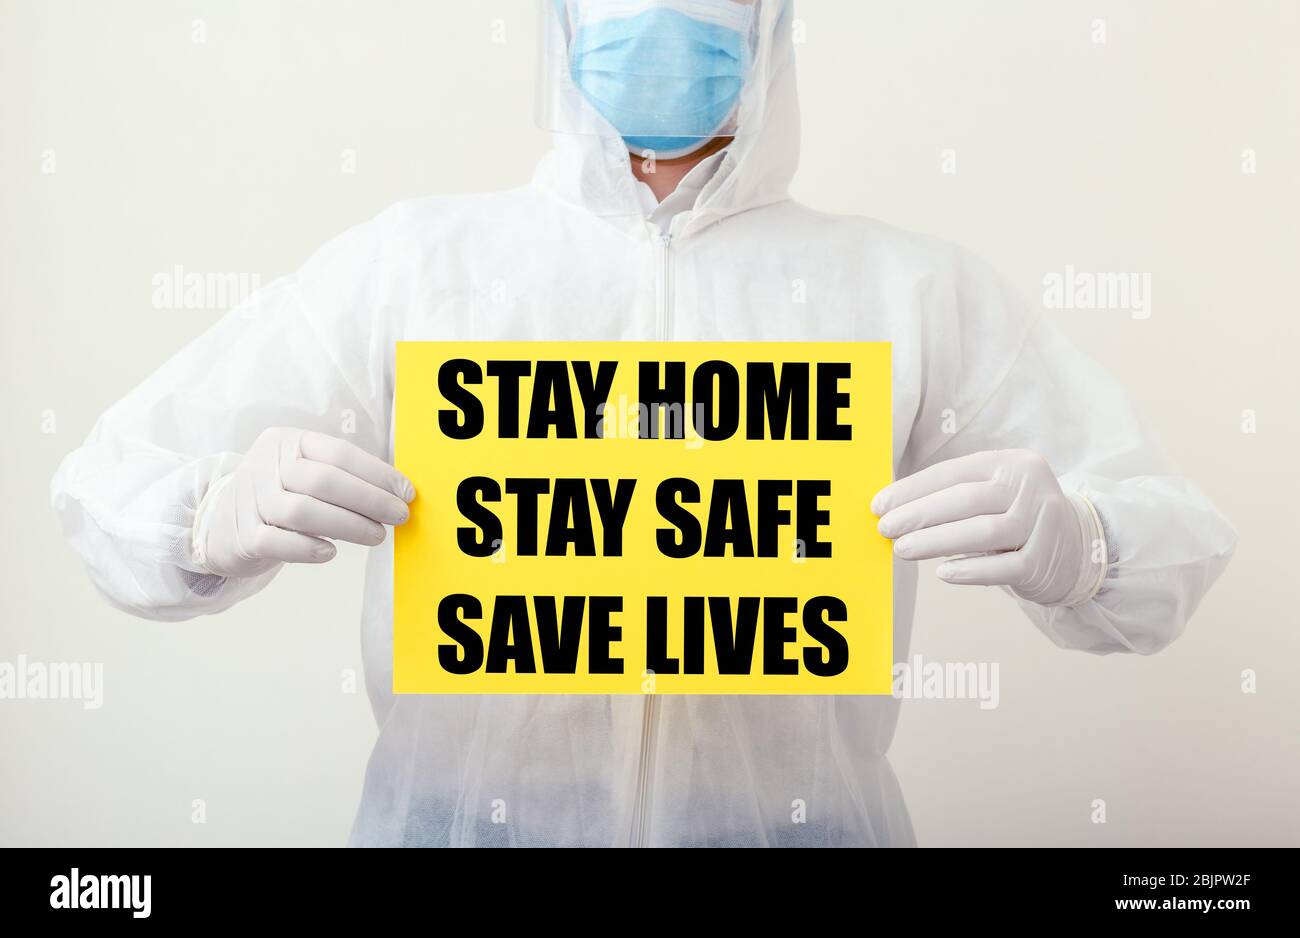 Stay Home Stay Safe Save Lives text on yellow warning sign in doctors hands. Coronavirus, Covid-19 self quarantine isolation. Medical, healthcare Stock Photo